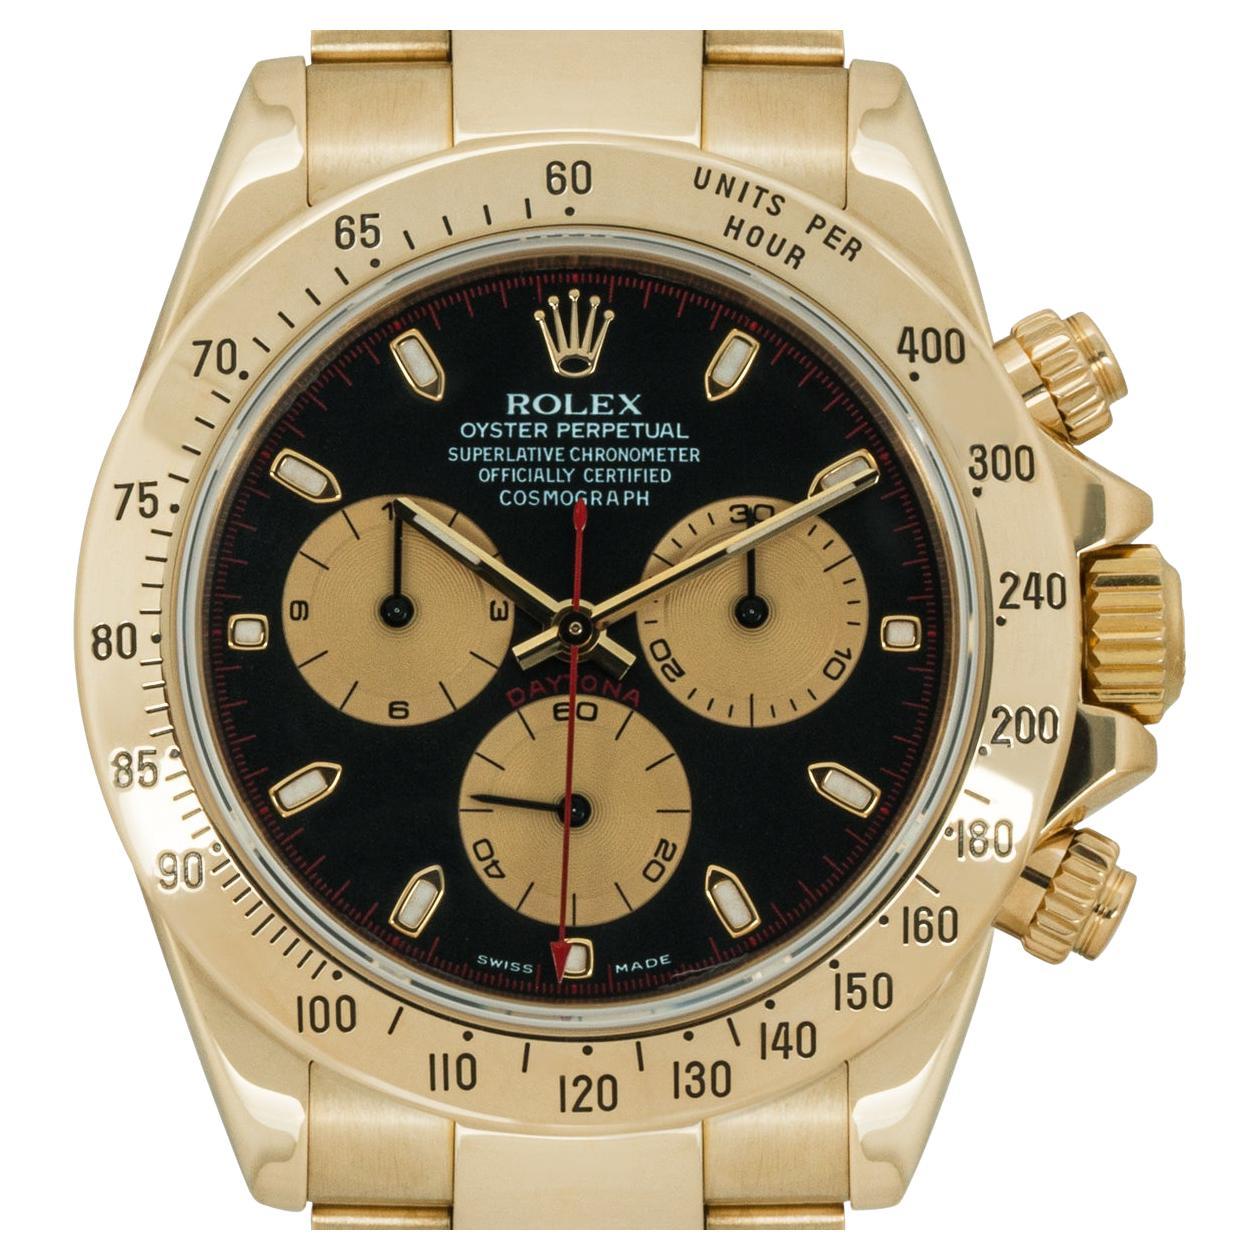 A yellow gold Cosmograph Daytona by Rolex. Featuring a black dial with contrasting outer minute track and champagne sub-dials as well as a yellow gold tachymeter bezel.

Fitted with a sapphire glass, a self-winding Cosmograph movement and an Oyster